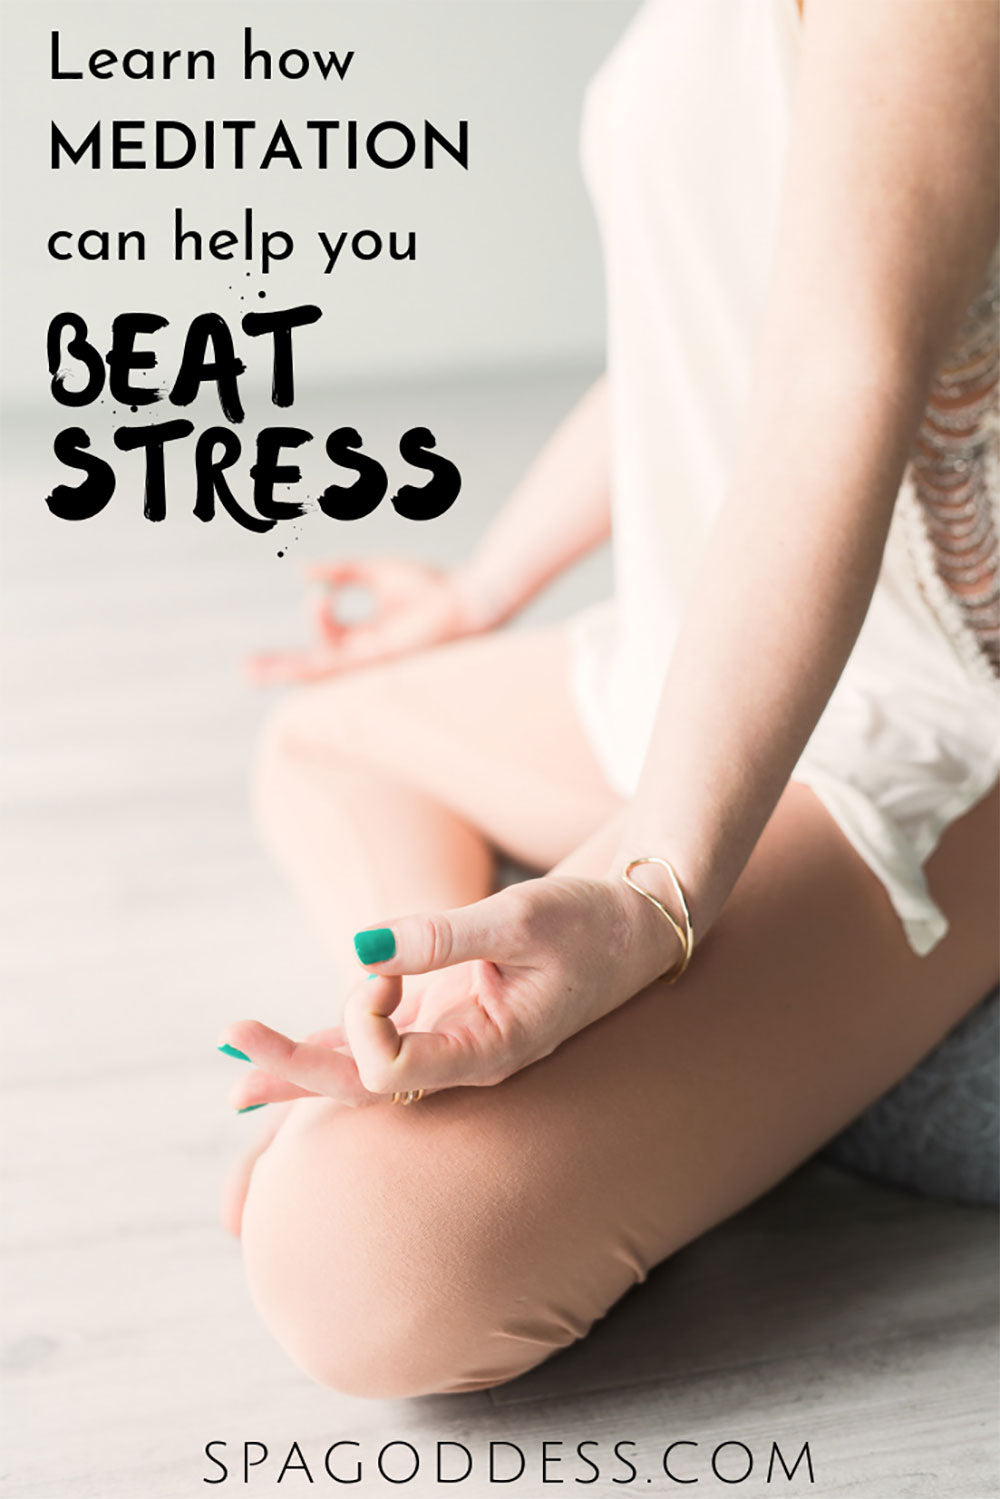 Learn how meditation can help you beat stress